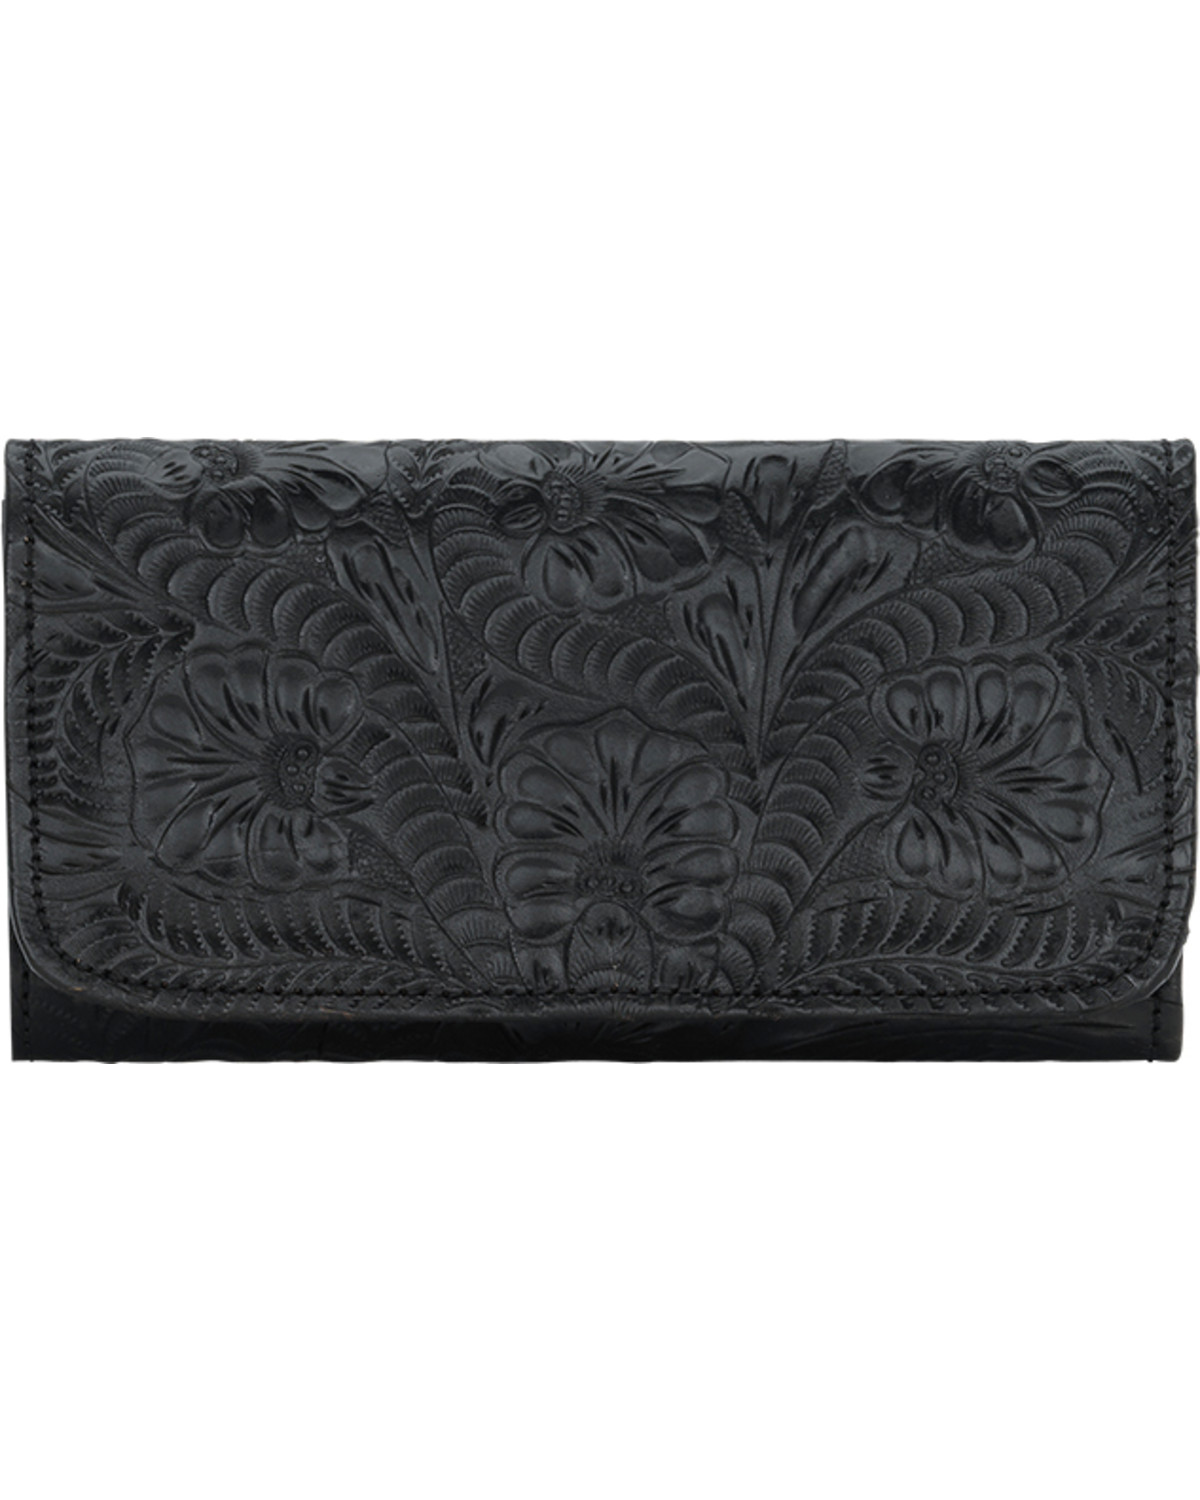 American West Women's Tri-Fold Wallet with Snap Closure